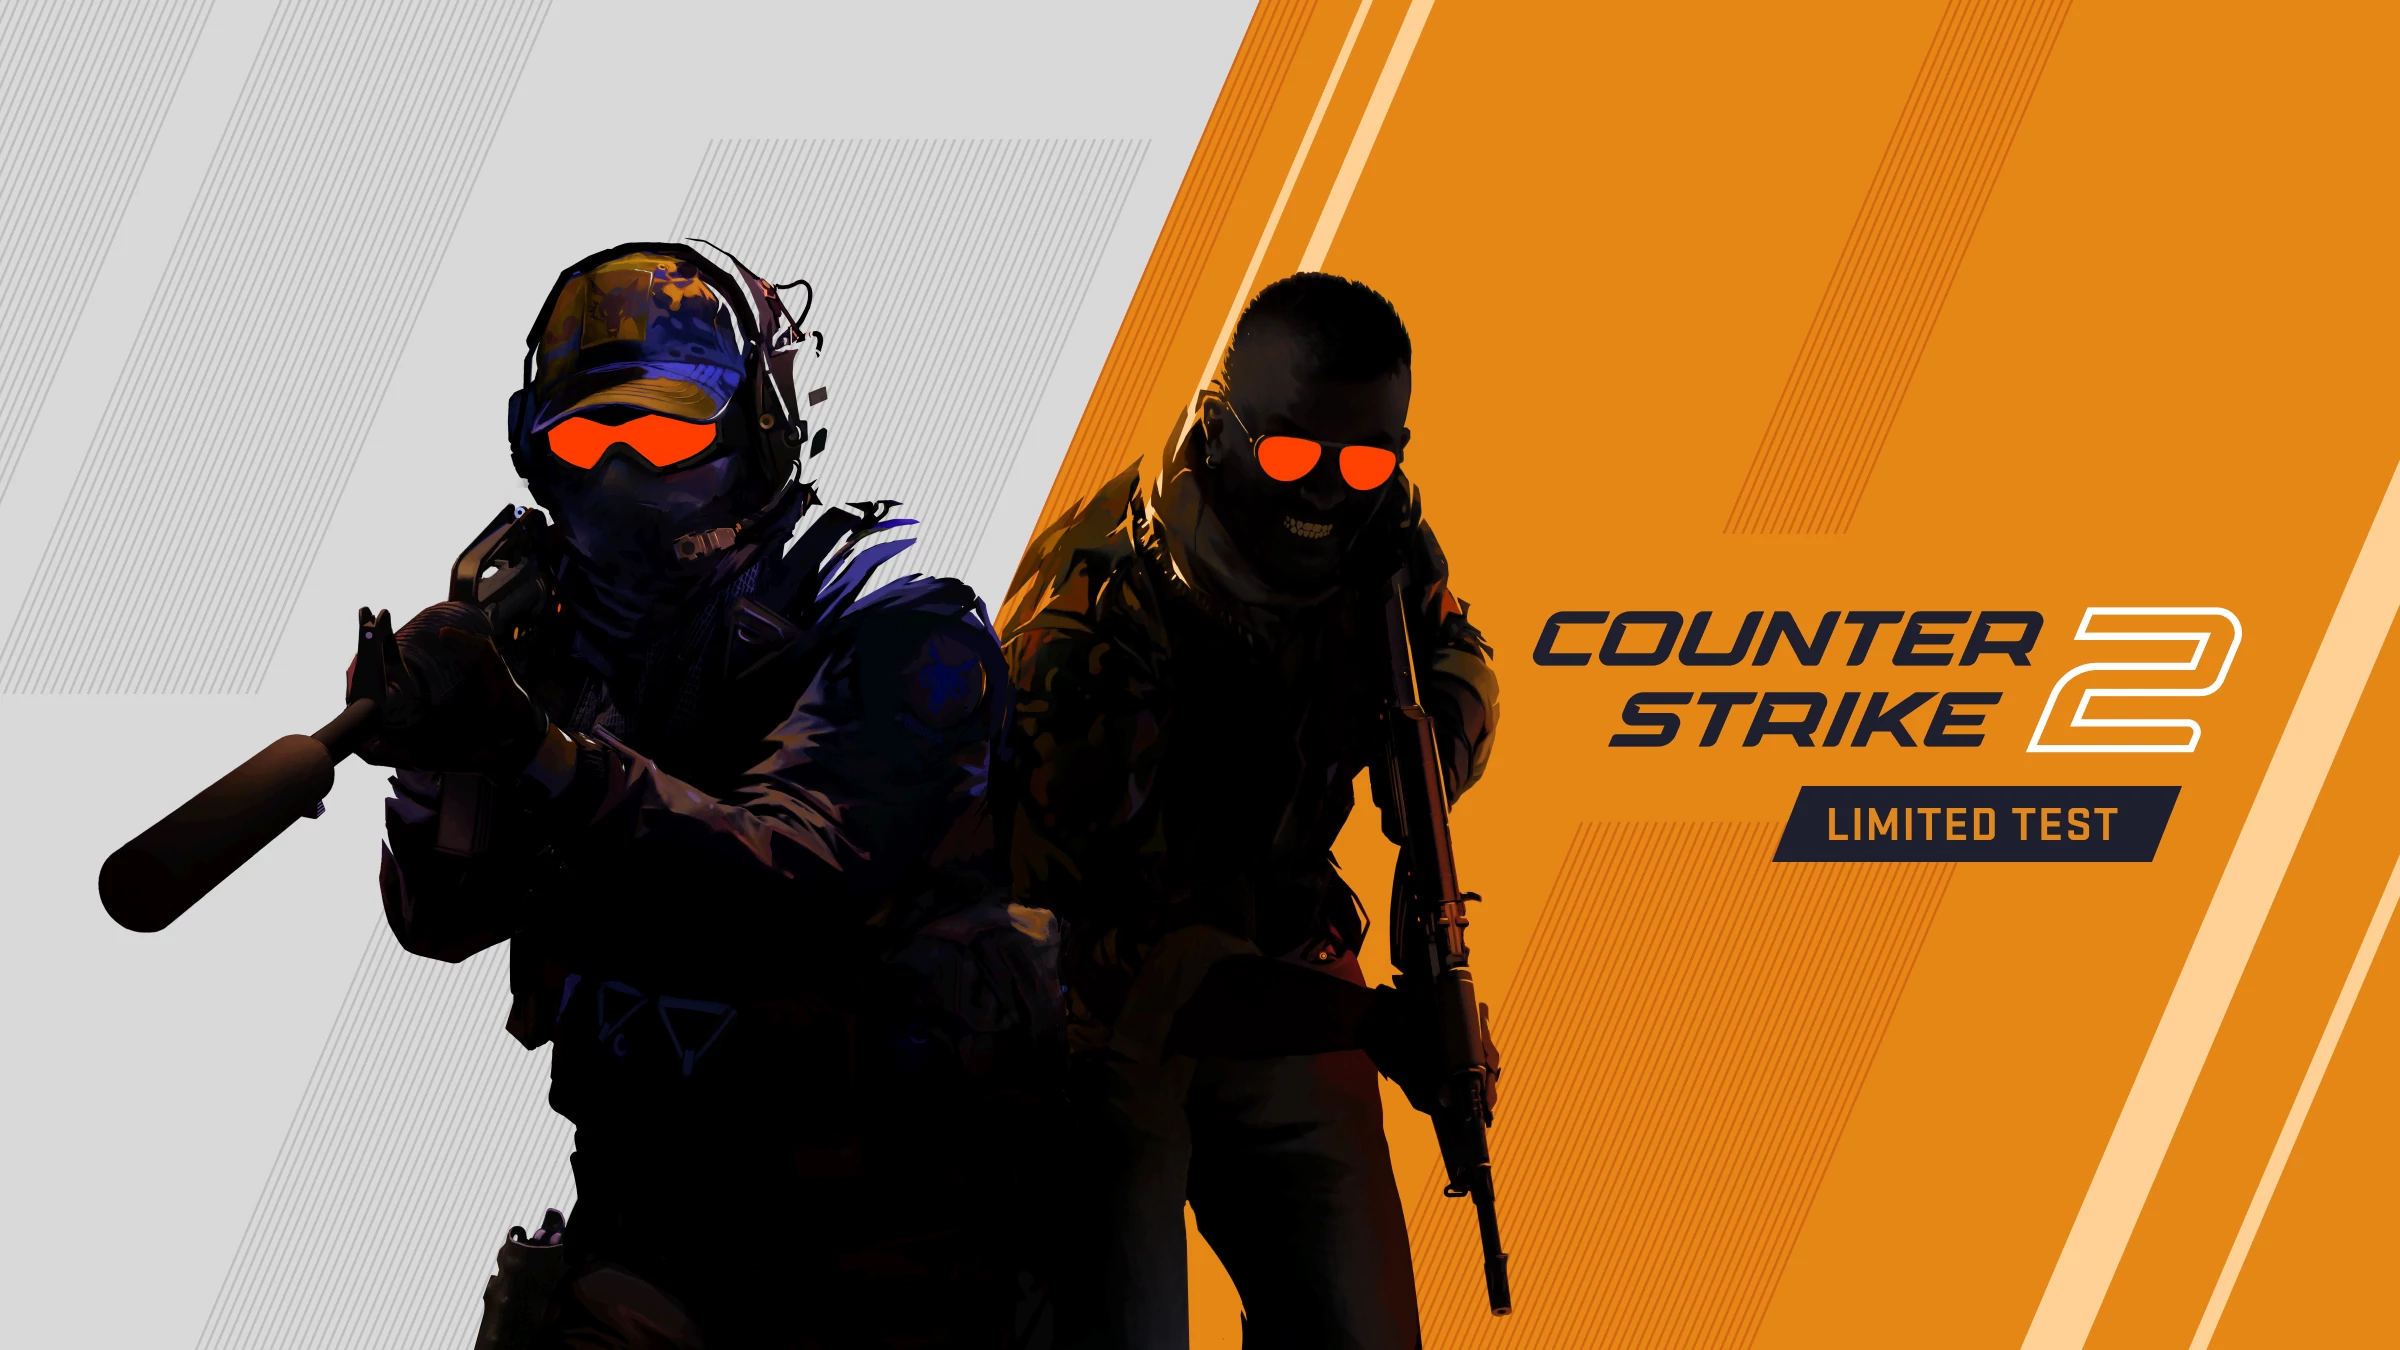 Counter-Strike 2 moves to MR12 – shorter but more exciting matches